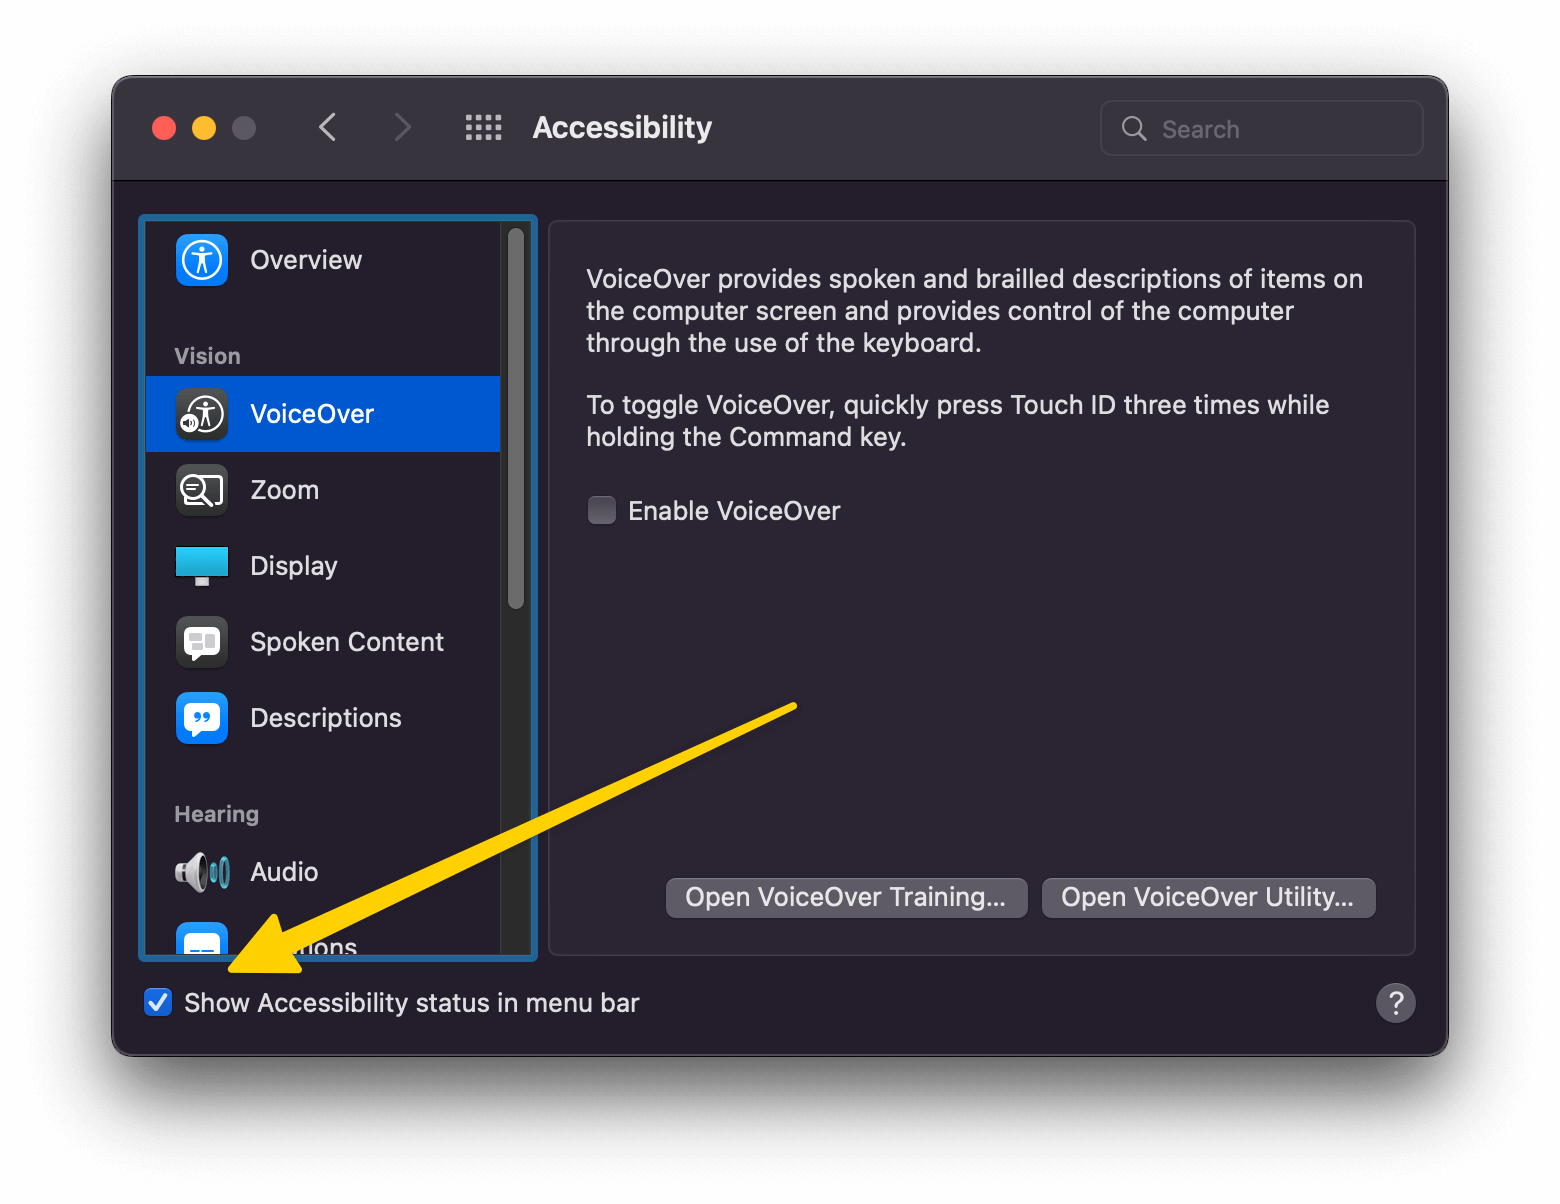 The accessibility panel in MacOS settings